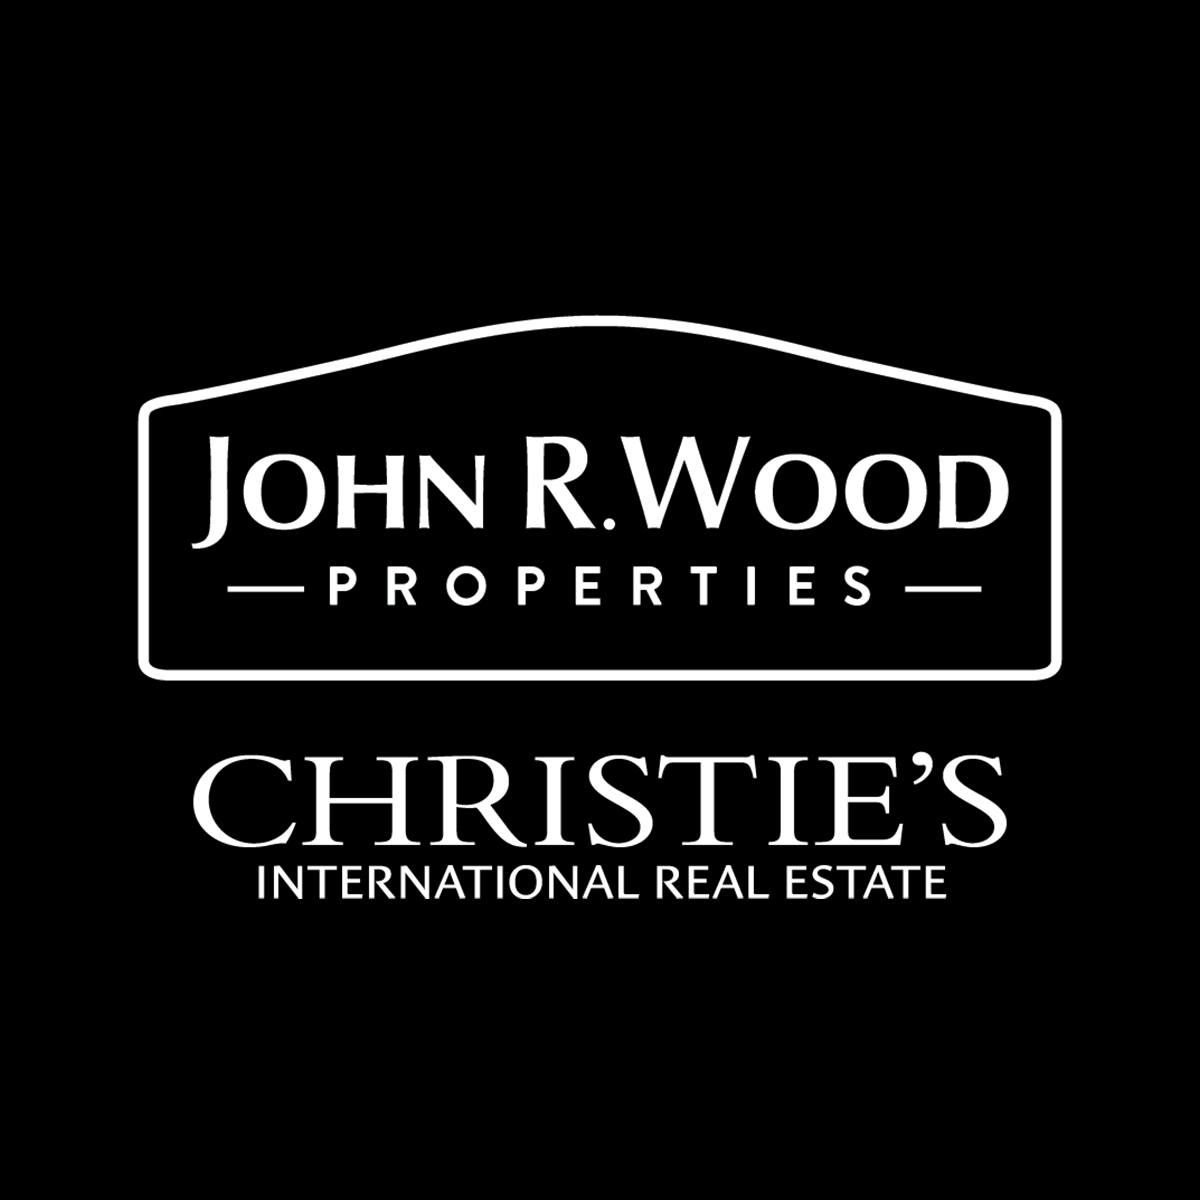 John R Wood Properties logo with text saying "Christie's International Real Eatate"